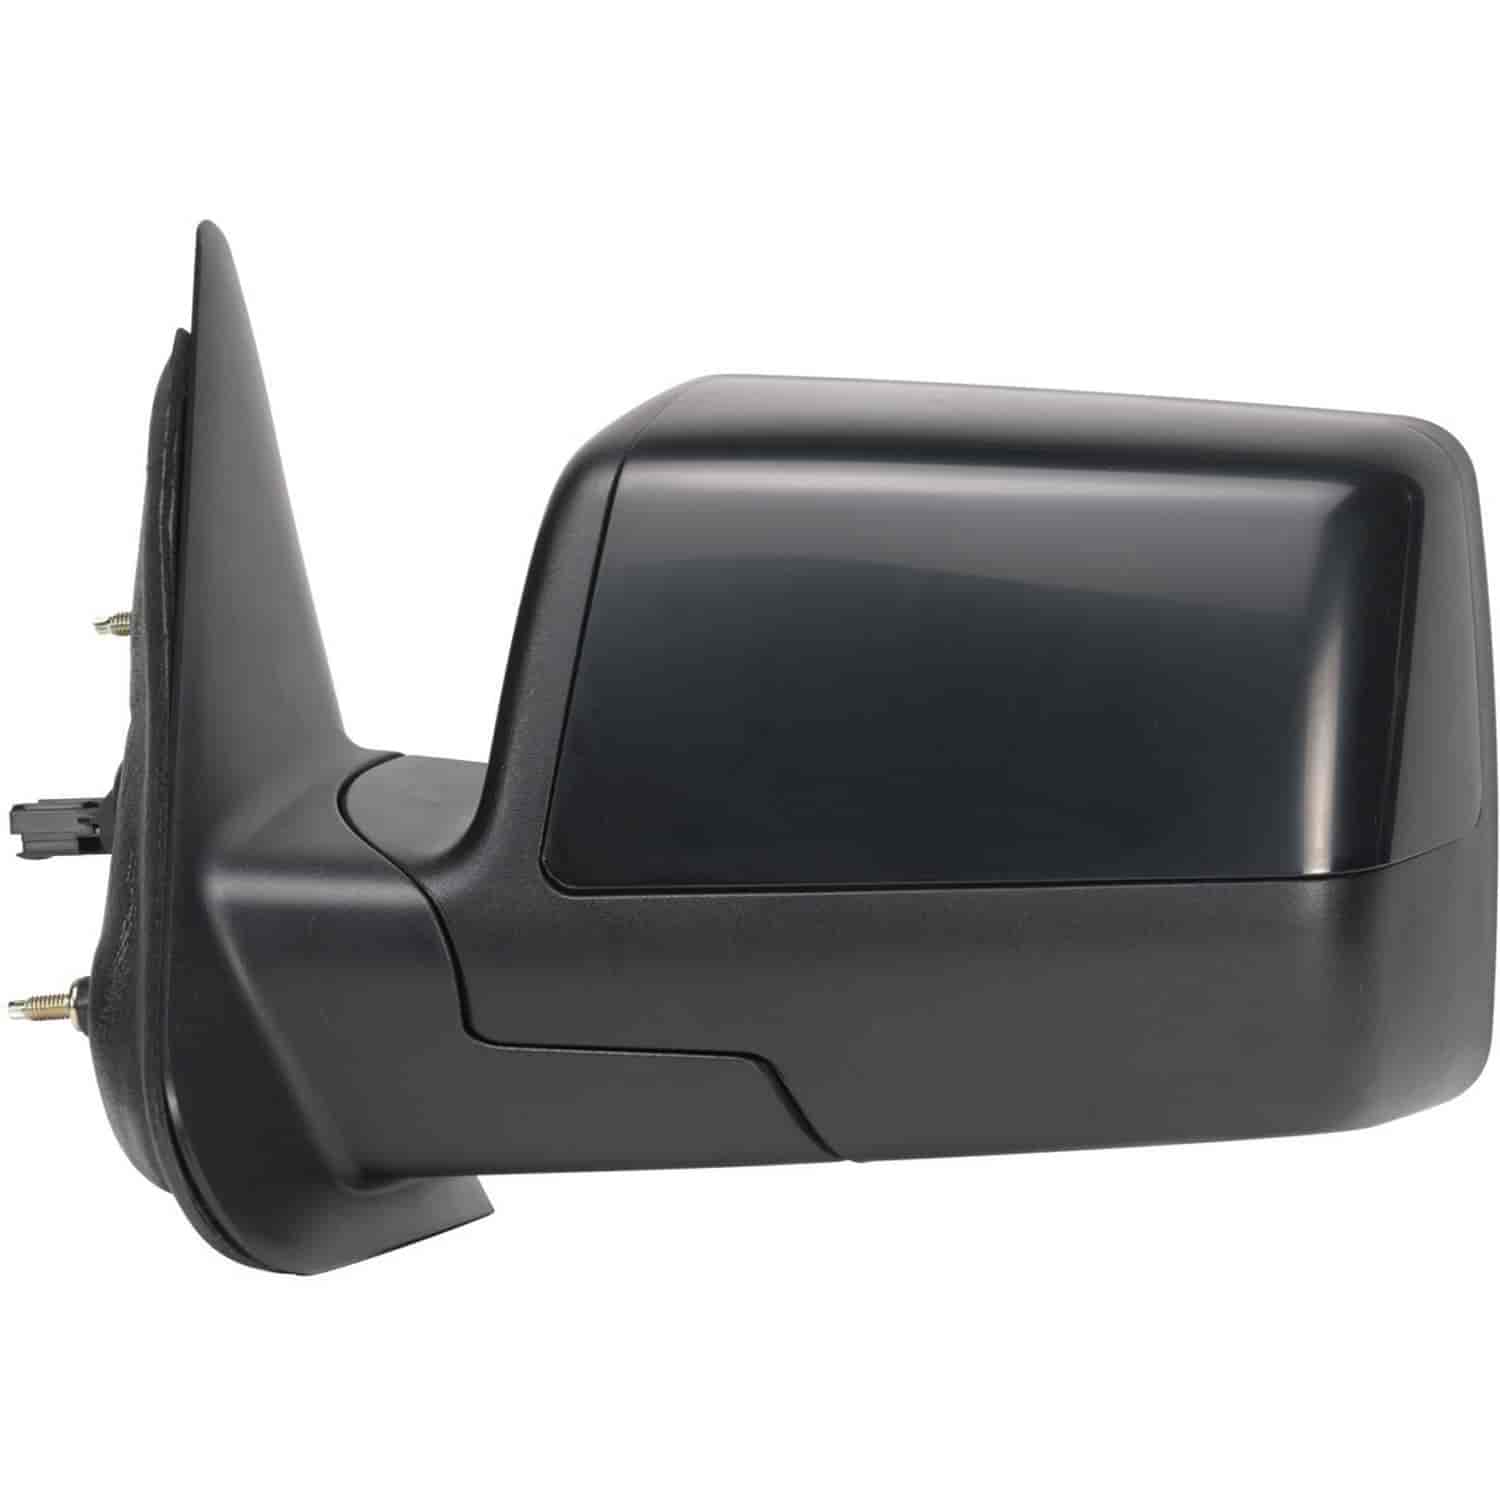 OEM Style Replacement mirror for 06-11 Ford Ranger driver side mirror tested to fit and function lik